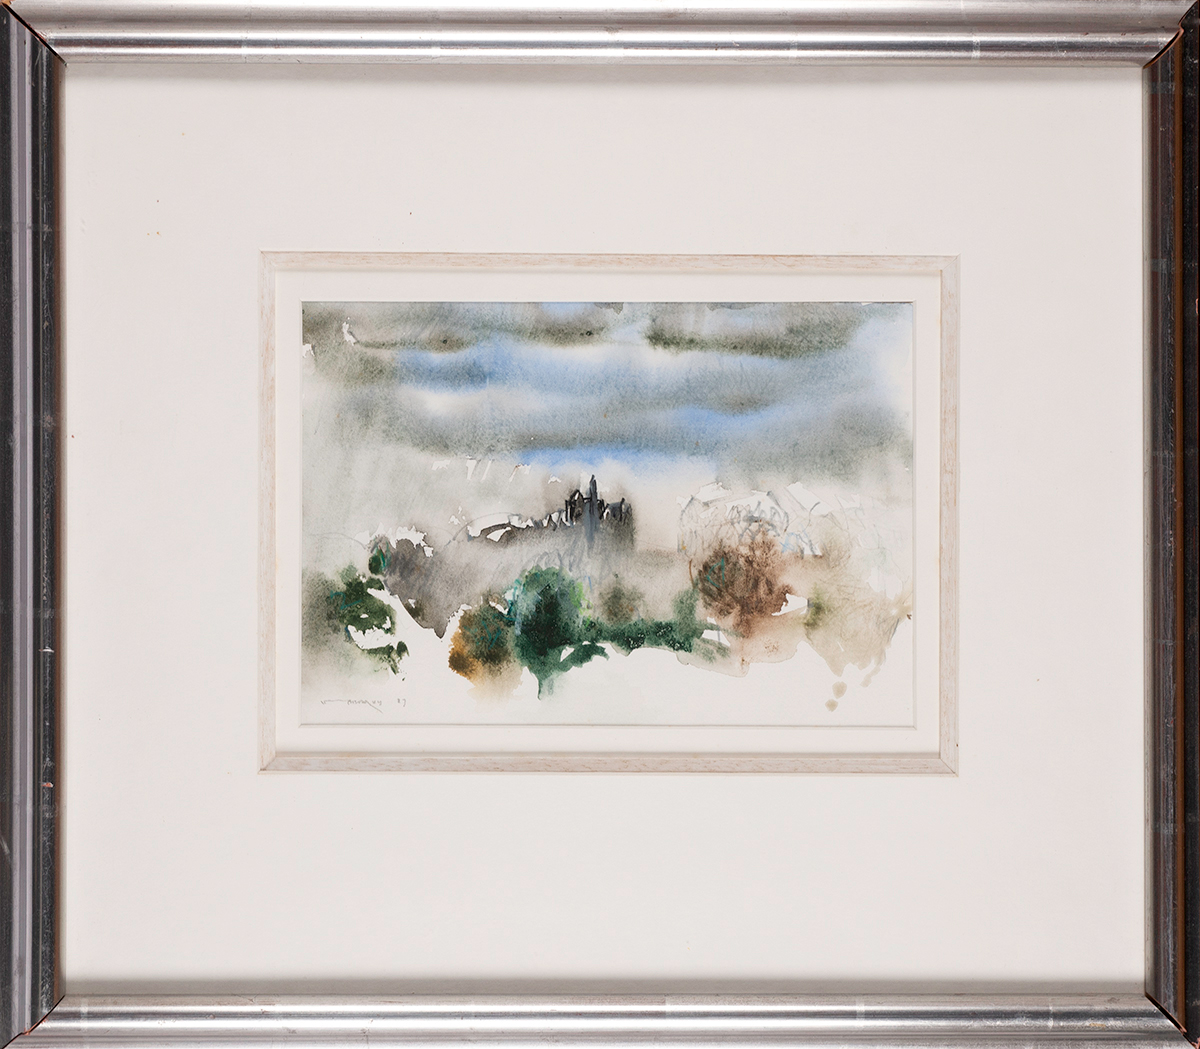 Louis le Brocquy HRHA (1916-2012) CASHEL, 1987 watercolour signed and dated lower left; with - Image 2 of 5